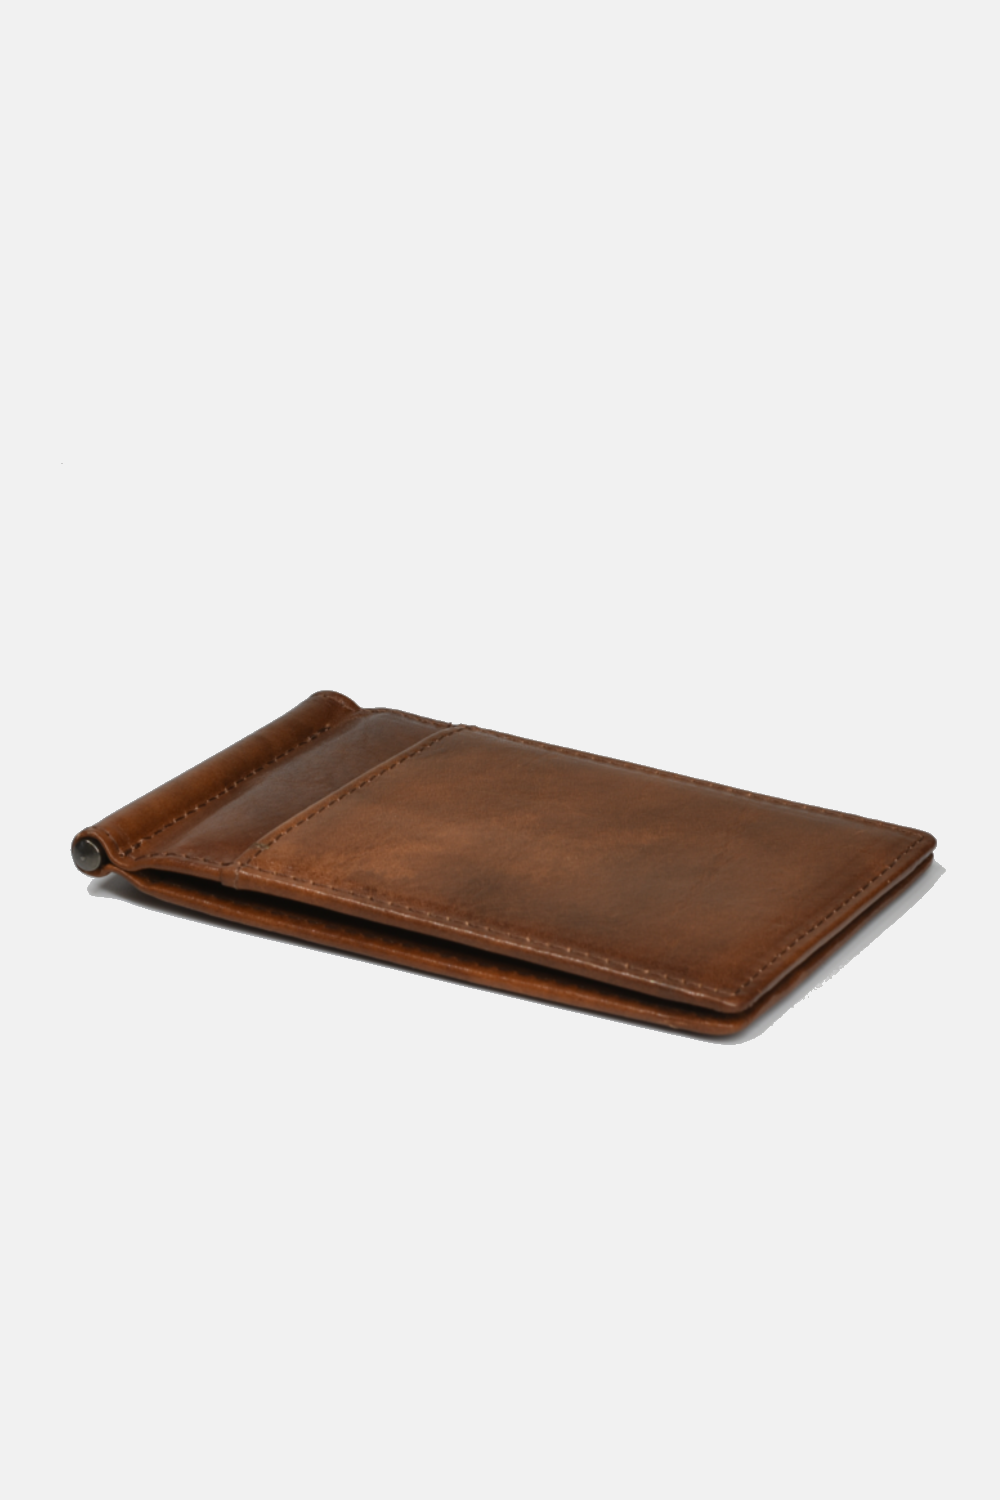 brown wallet laying flat against a white background